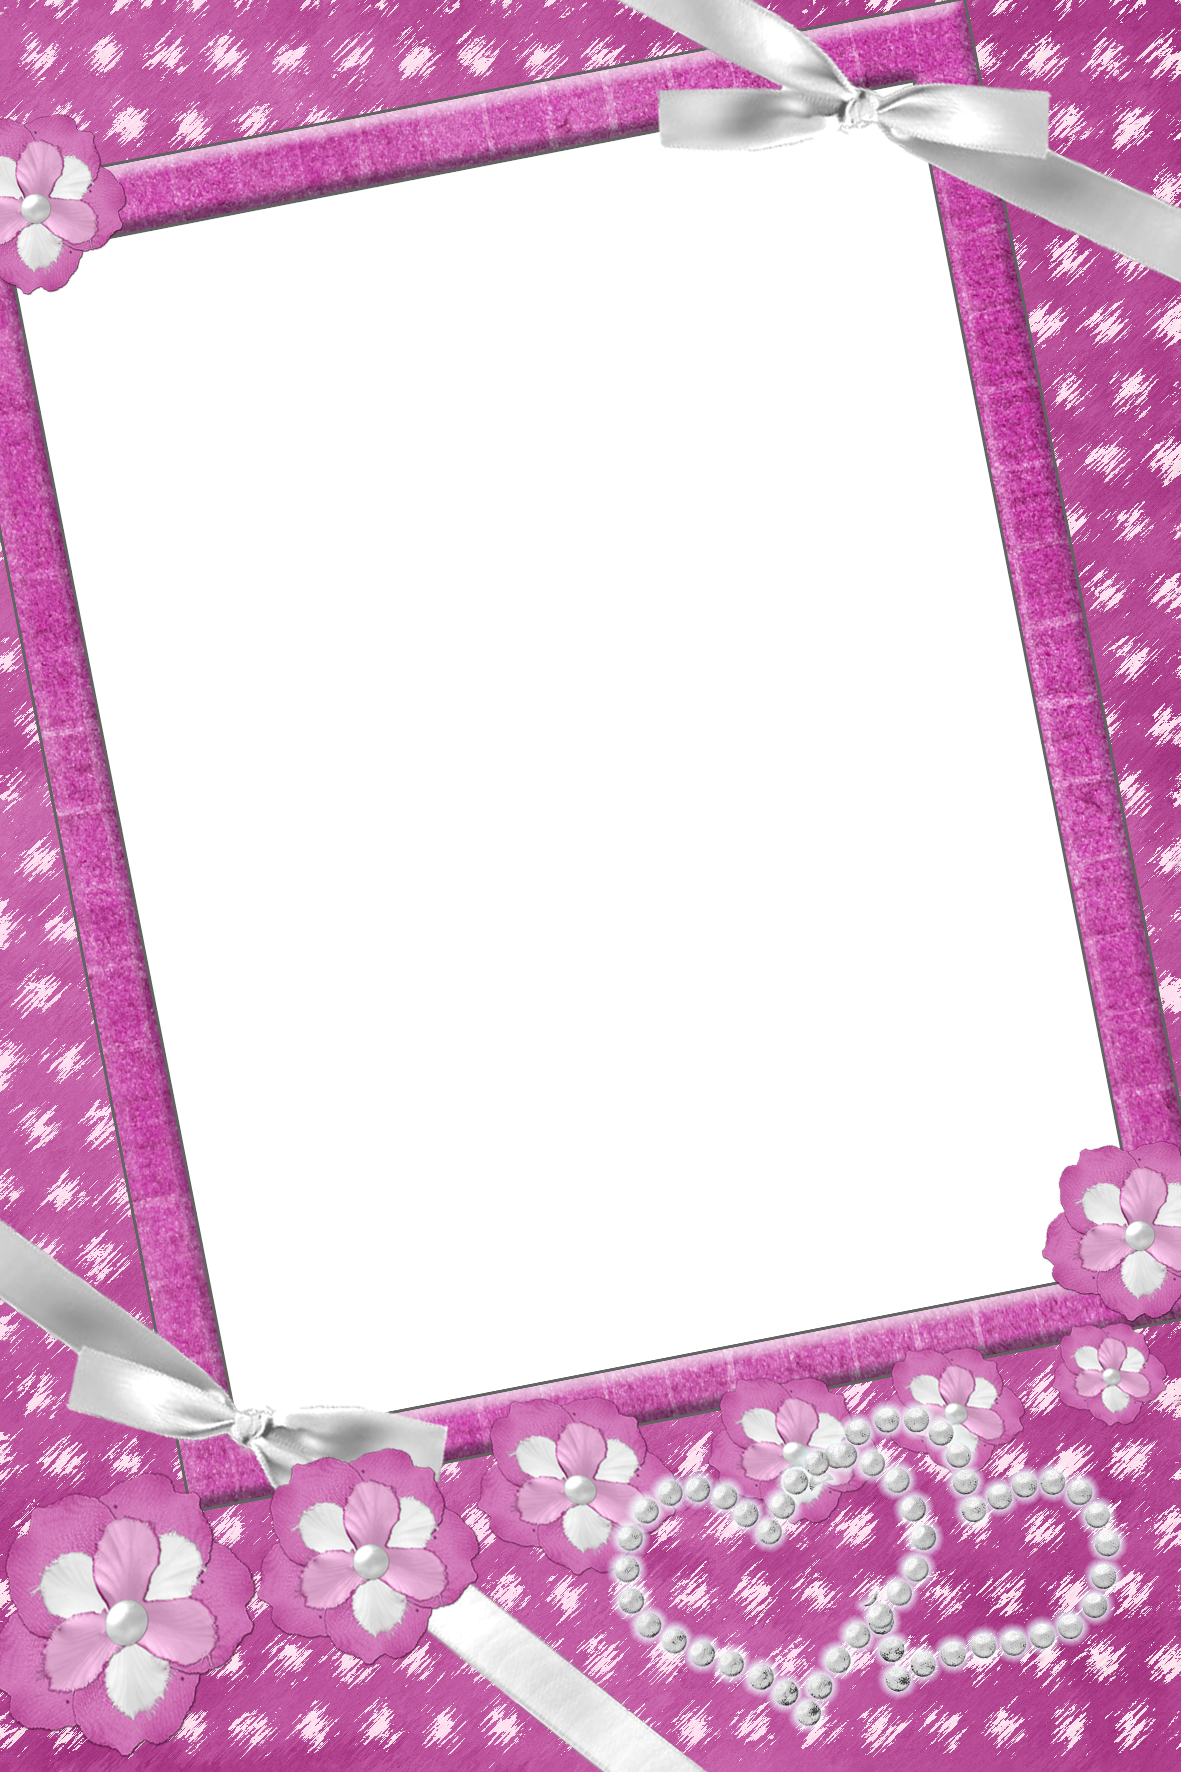 Border Frame Fuchsia PNG Image High Quality PNG Image